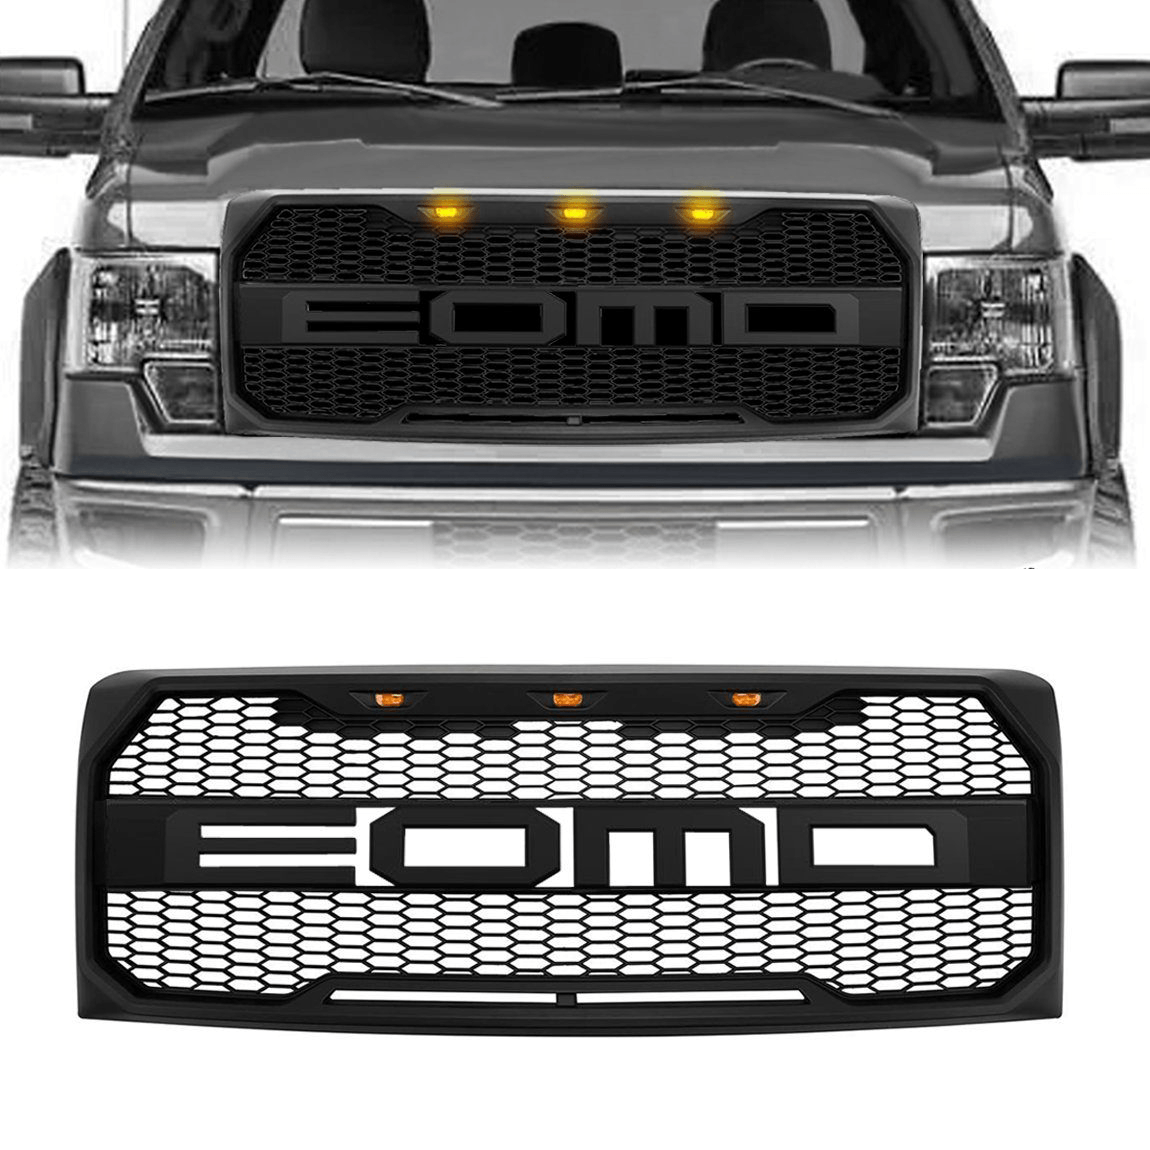 Raptor Style Front Grill Hood Grille W/LED - Matte Black for 2009-2014 Ford F150